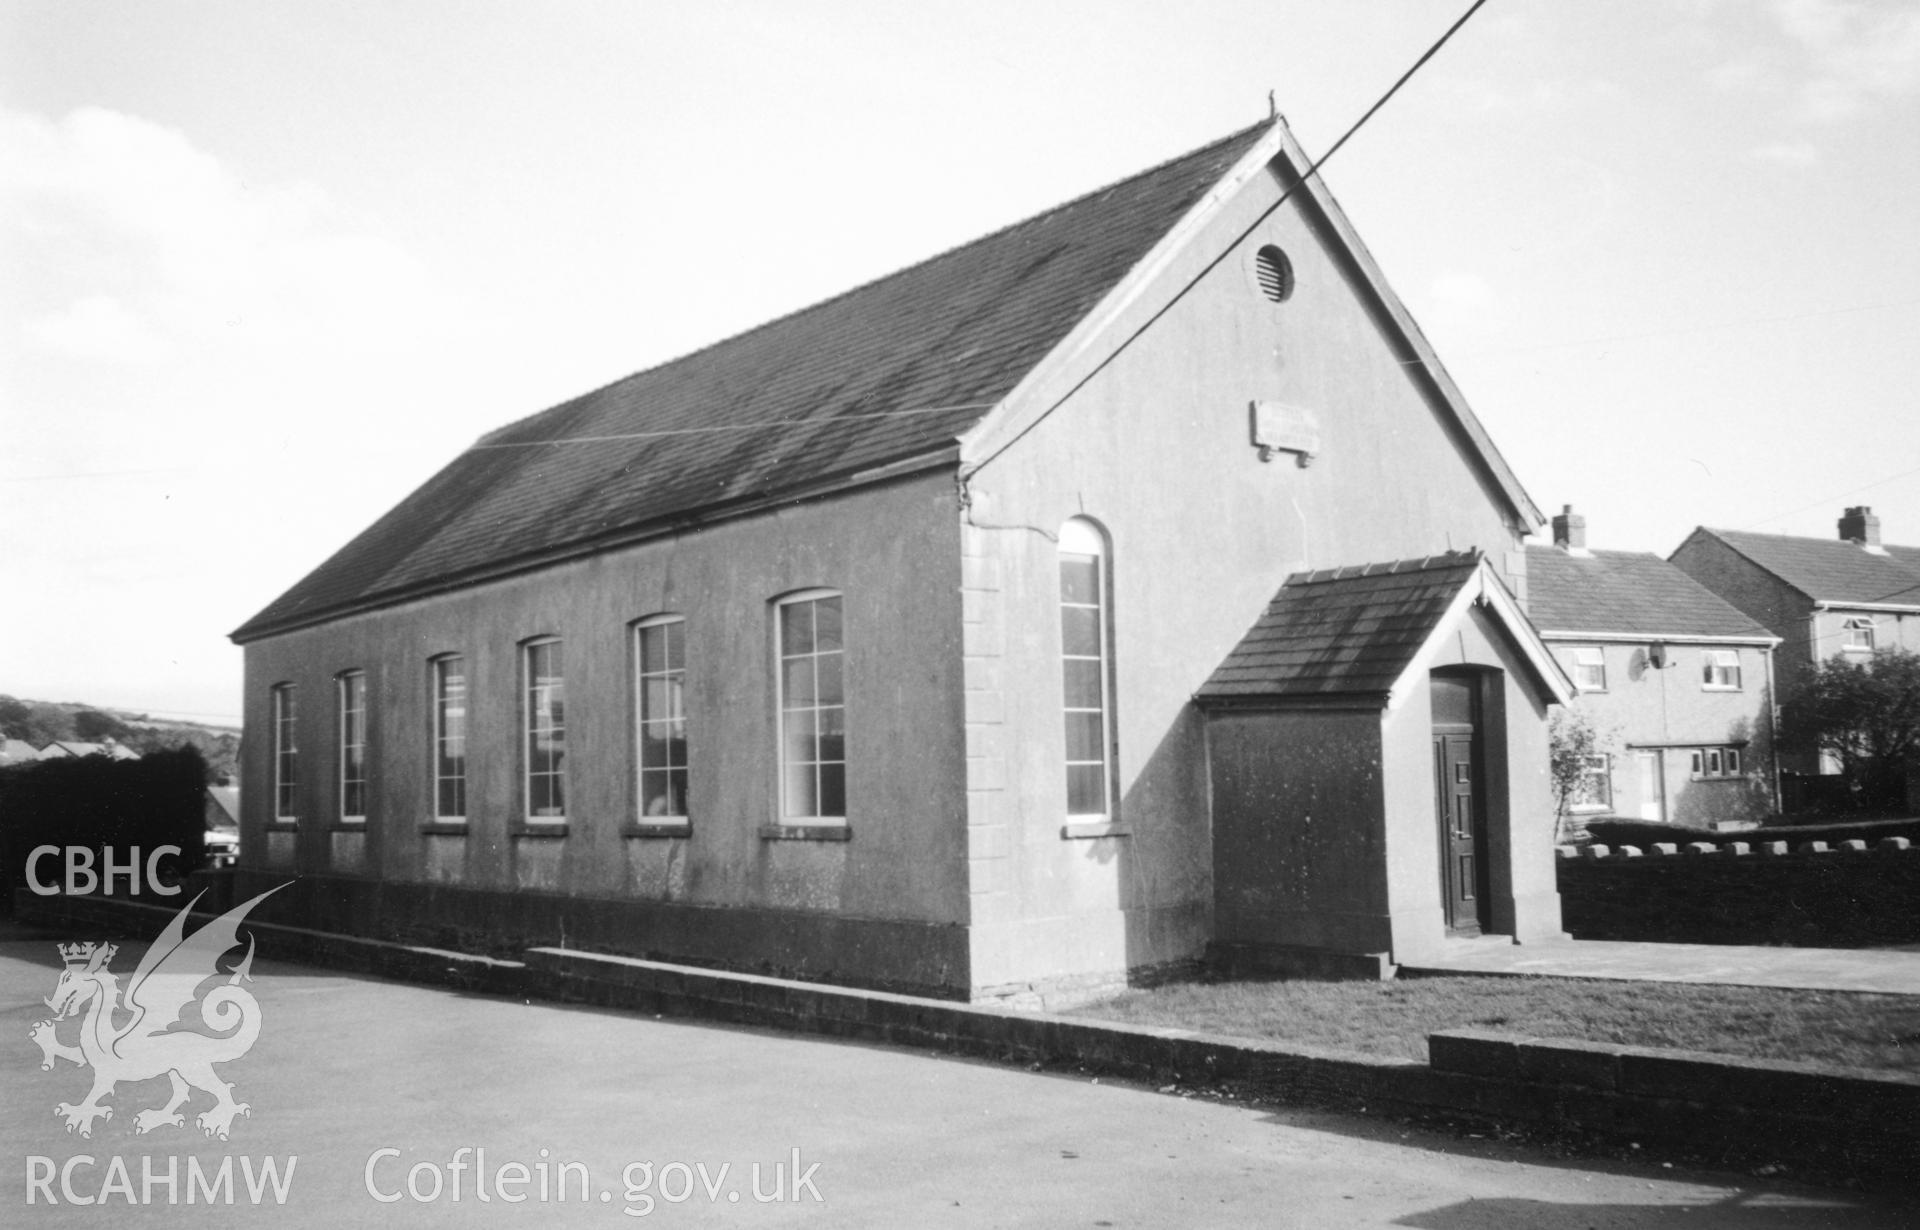 Digital copy of a black and white photograph showing an exterior view of Hebron Welsh Independent Chapel,  Drefach, taken by Robert Scourfield, c.1996.